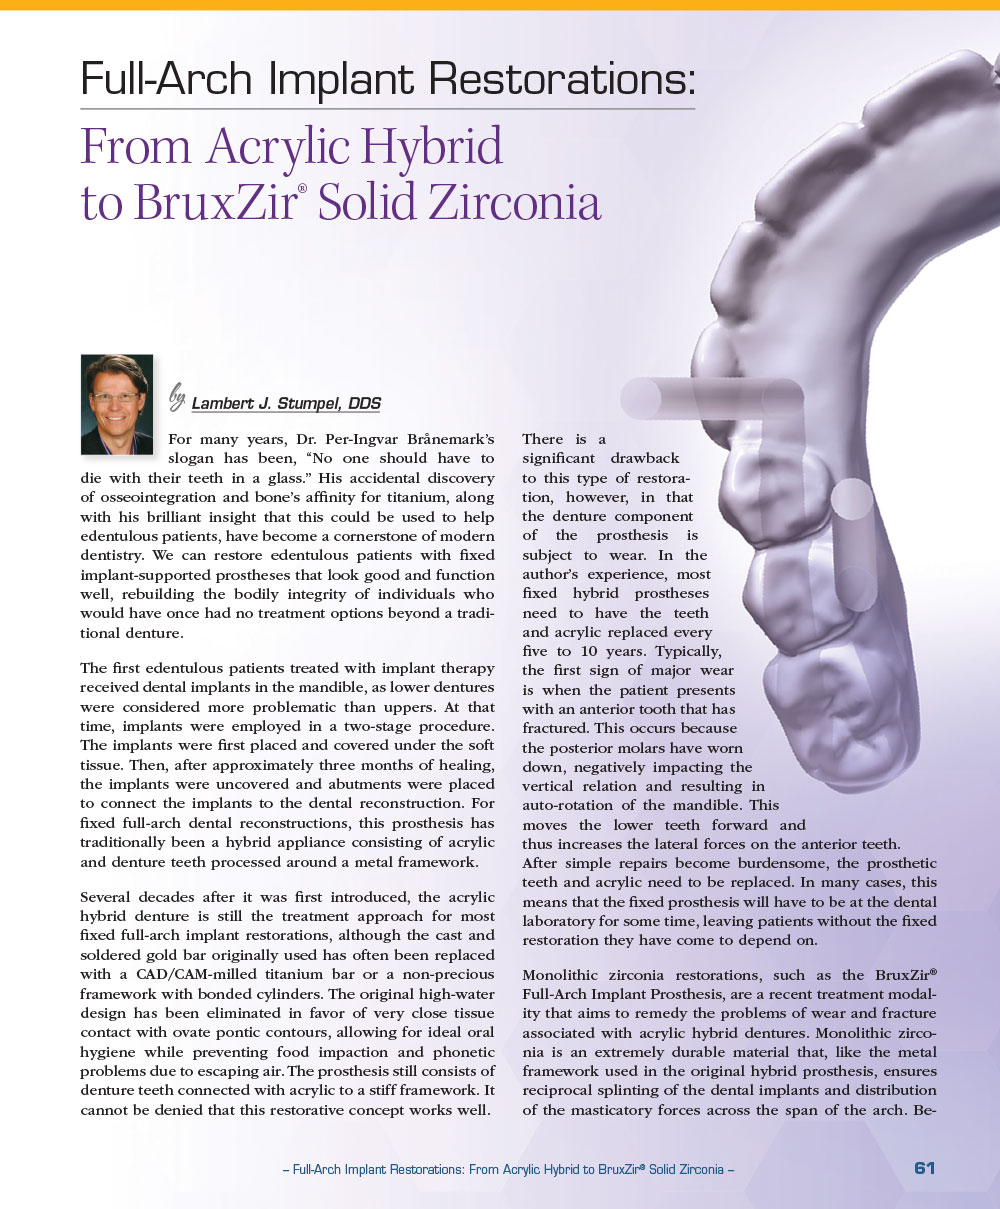 Full-Arch Implant Restorations: From Acrylic Hybrid to BruxZir® Solid Zirconia